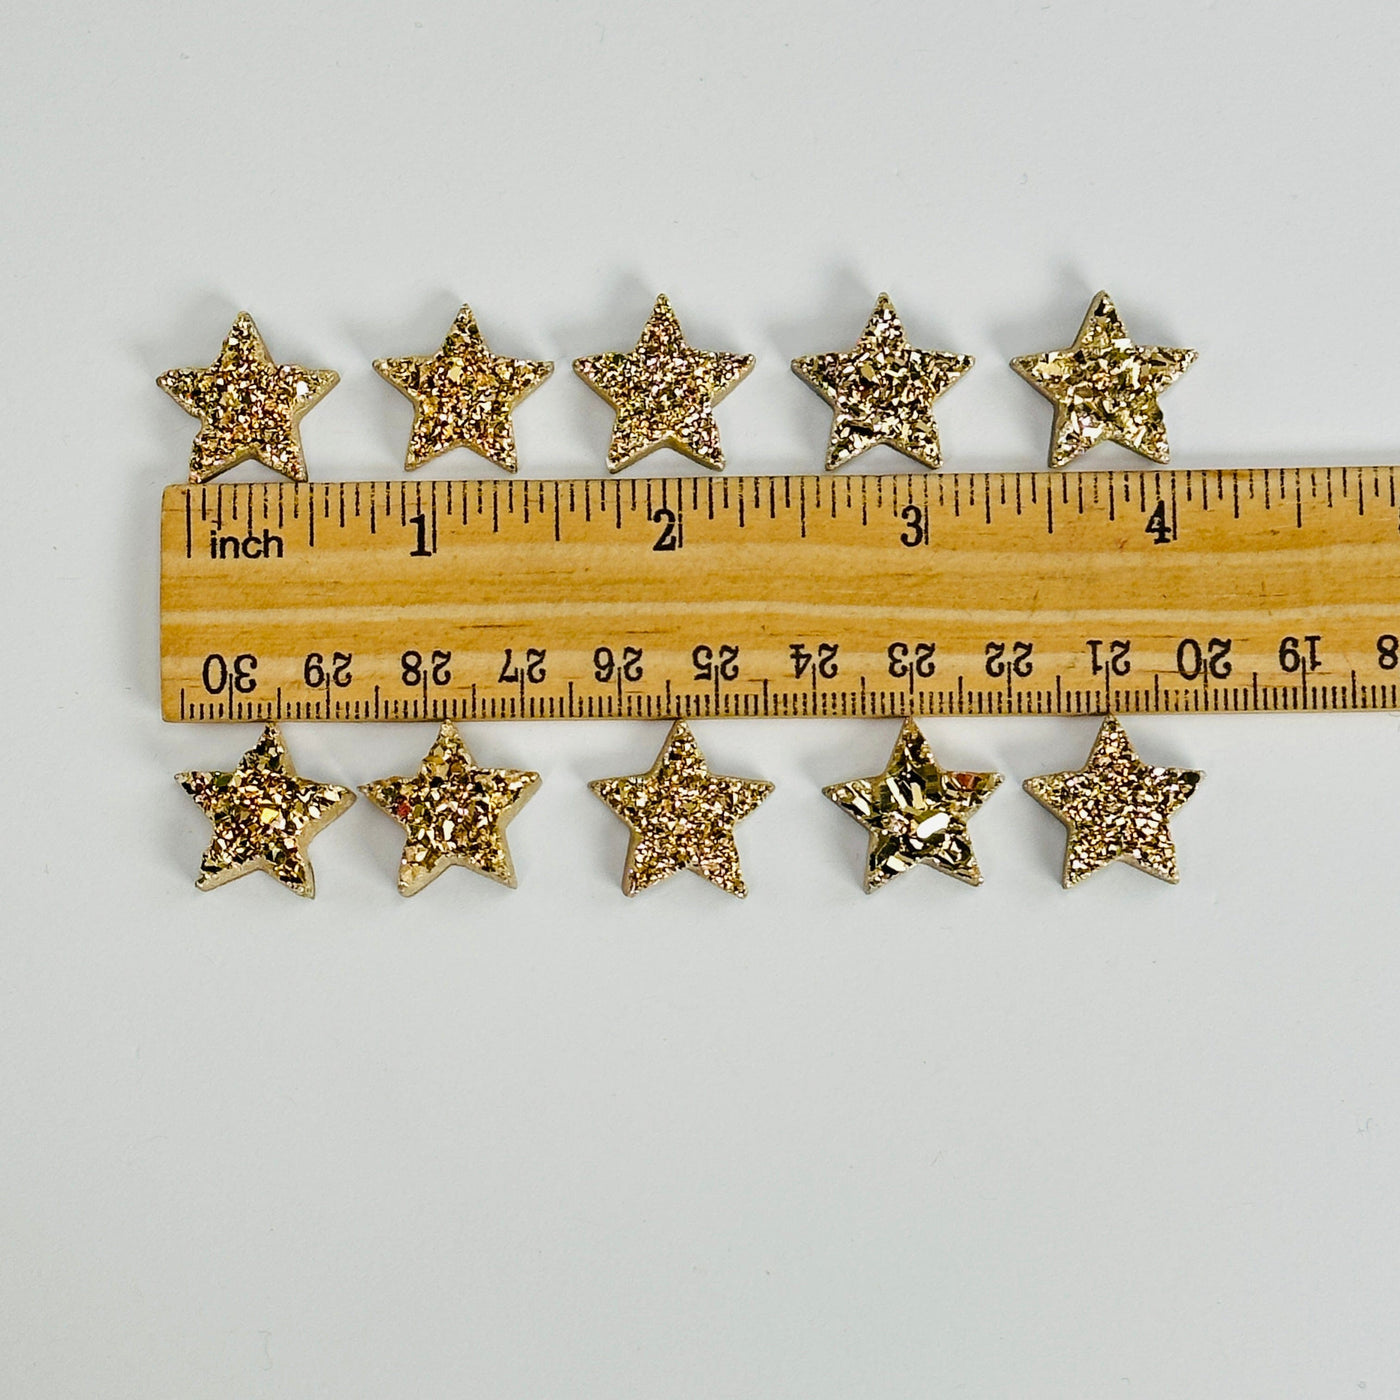 gold titanium druzy star cabochons next to a ruler for size reference